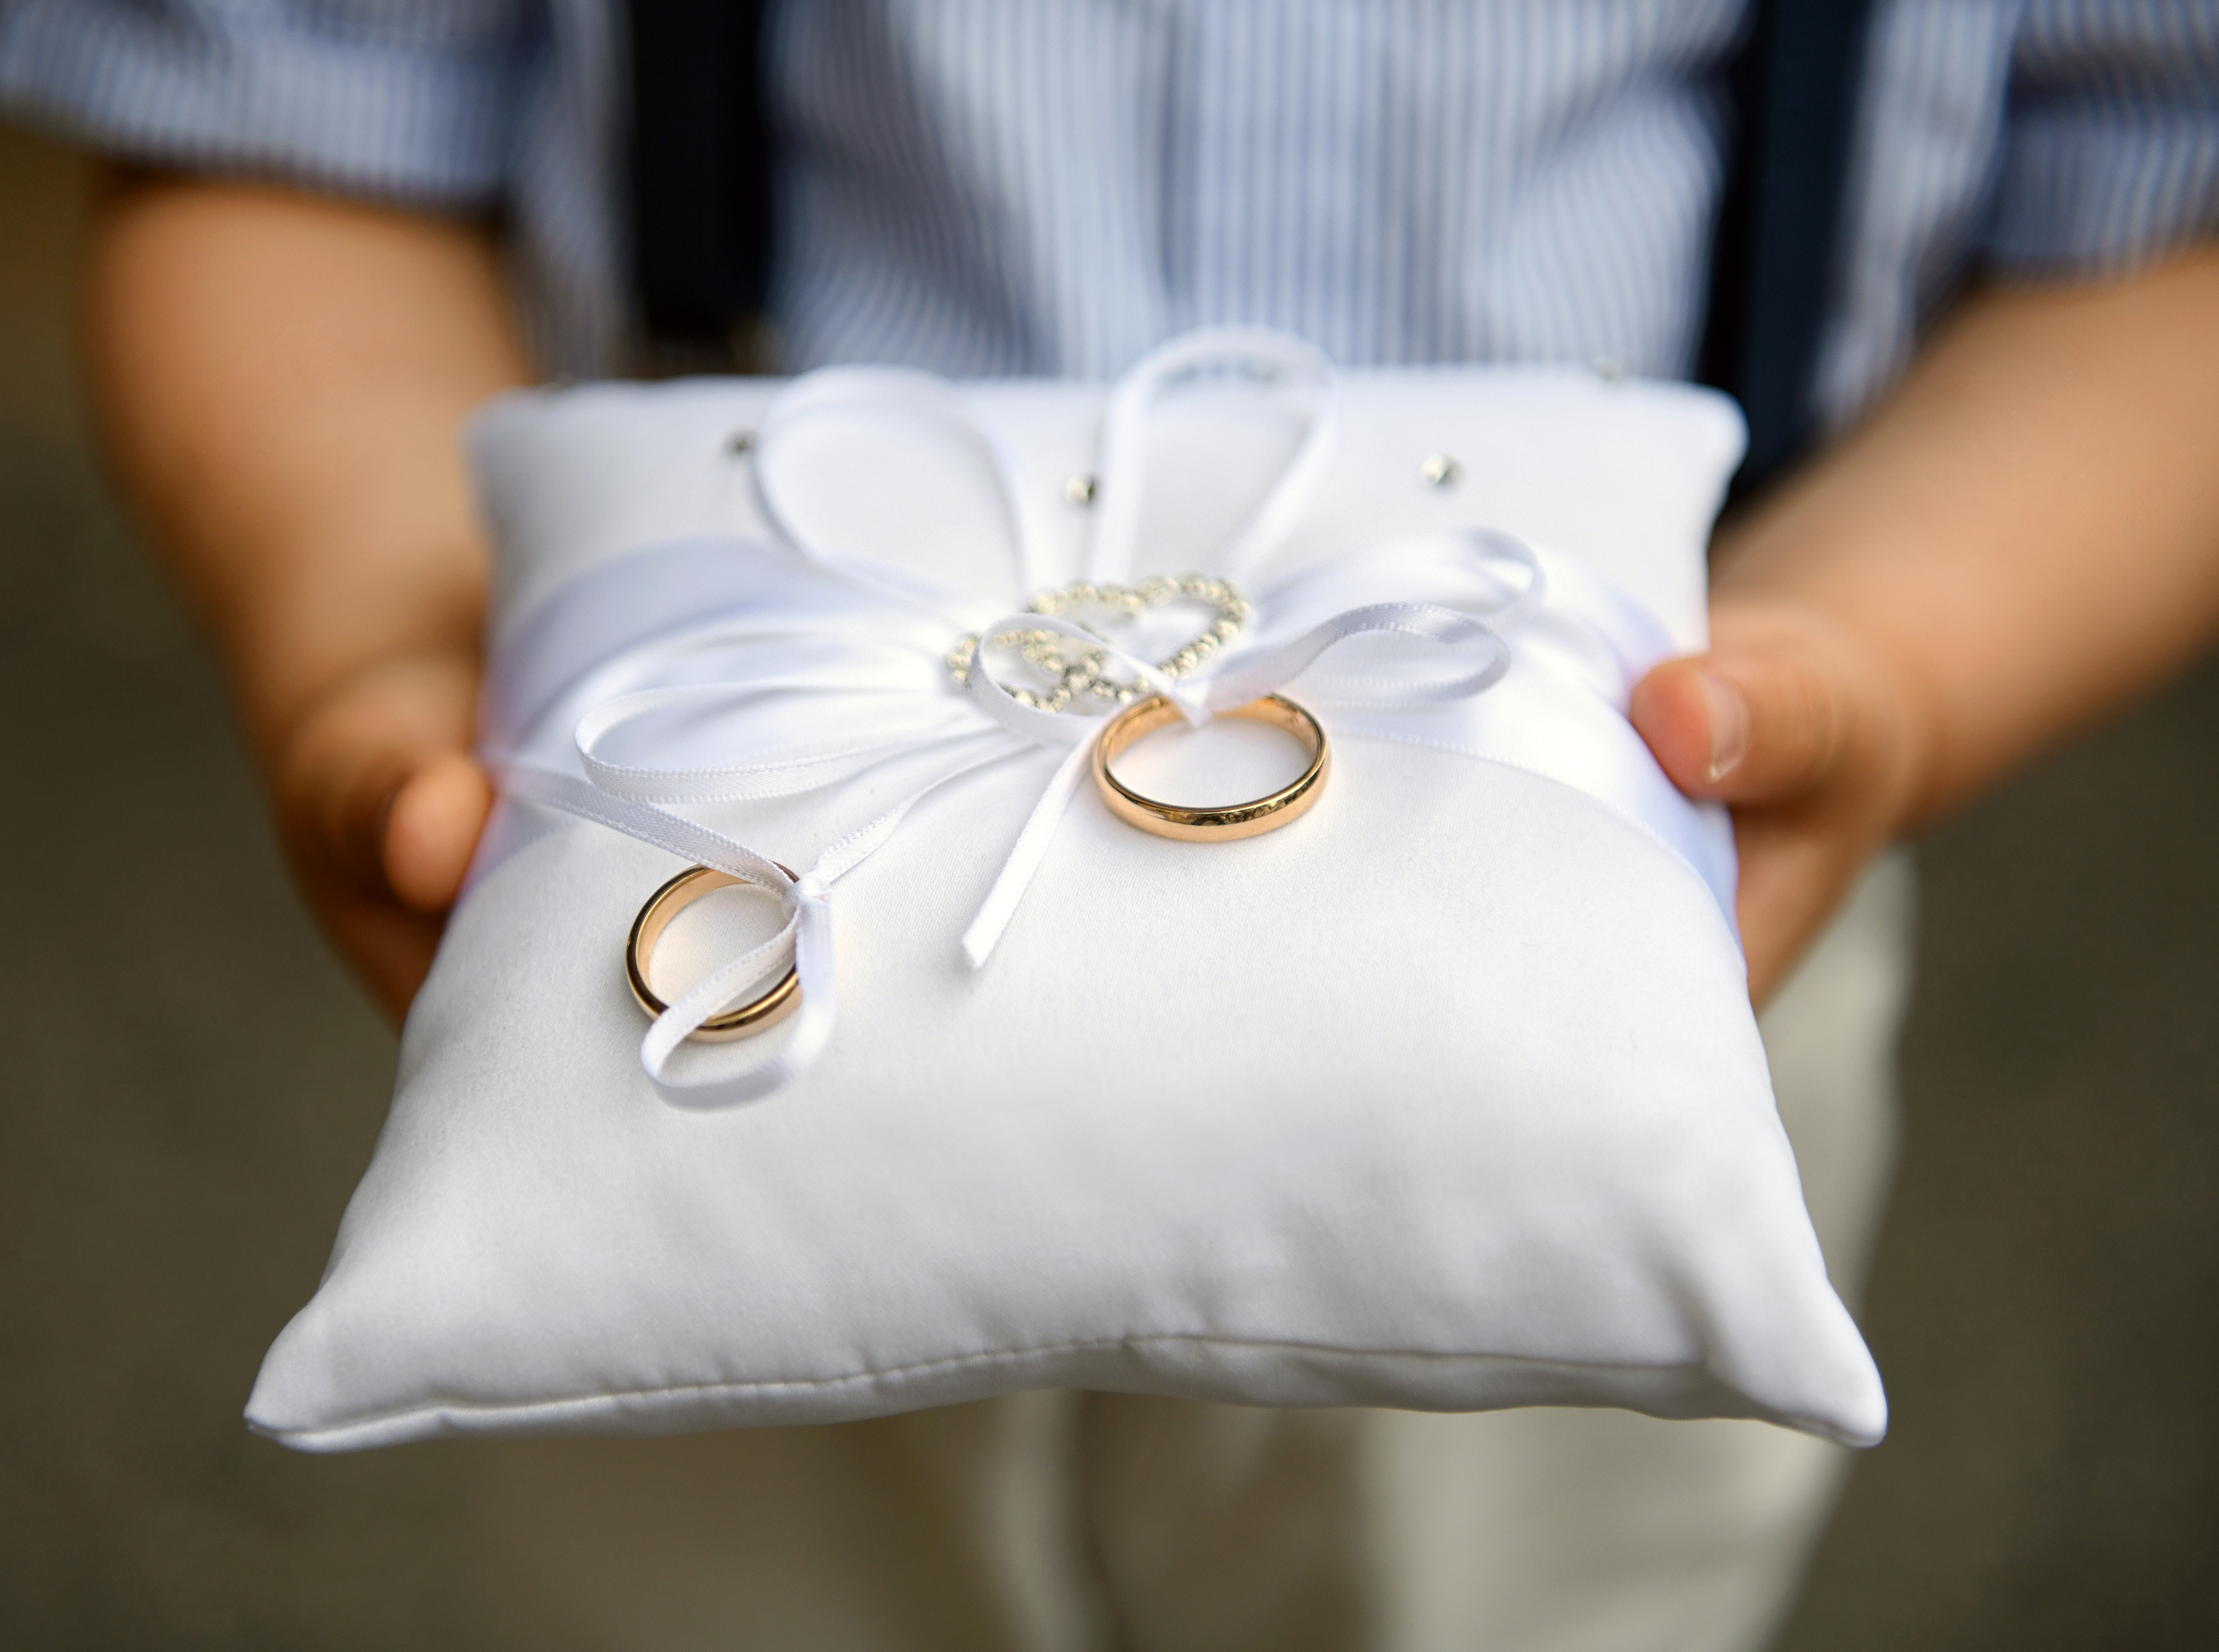 Ring bearer holding pillow with rings tied in a bow